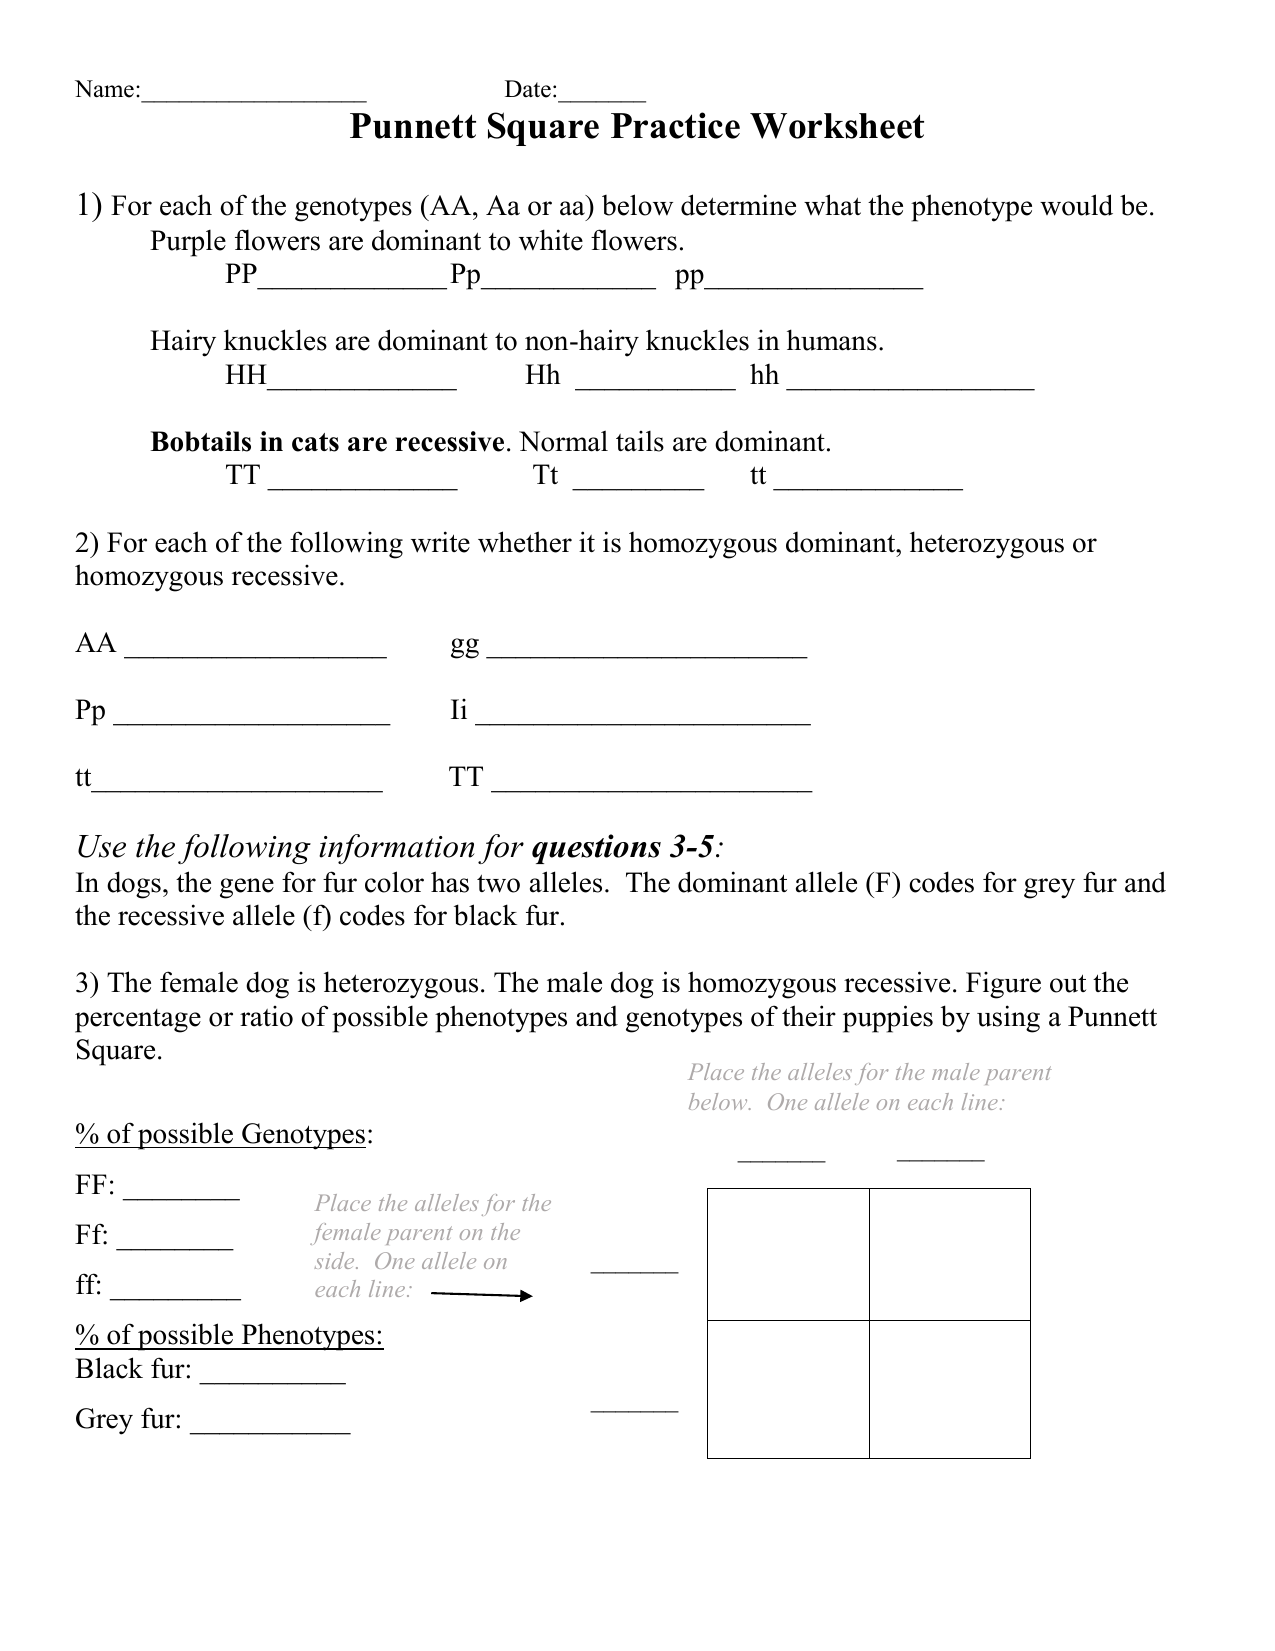 Punnett Square Practice Worksheet With Answers